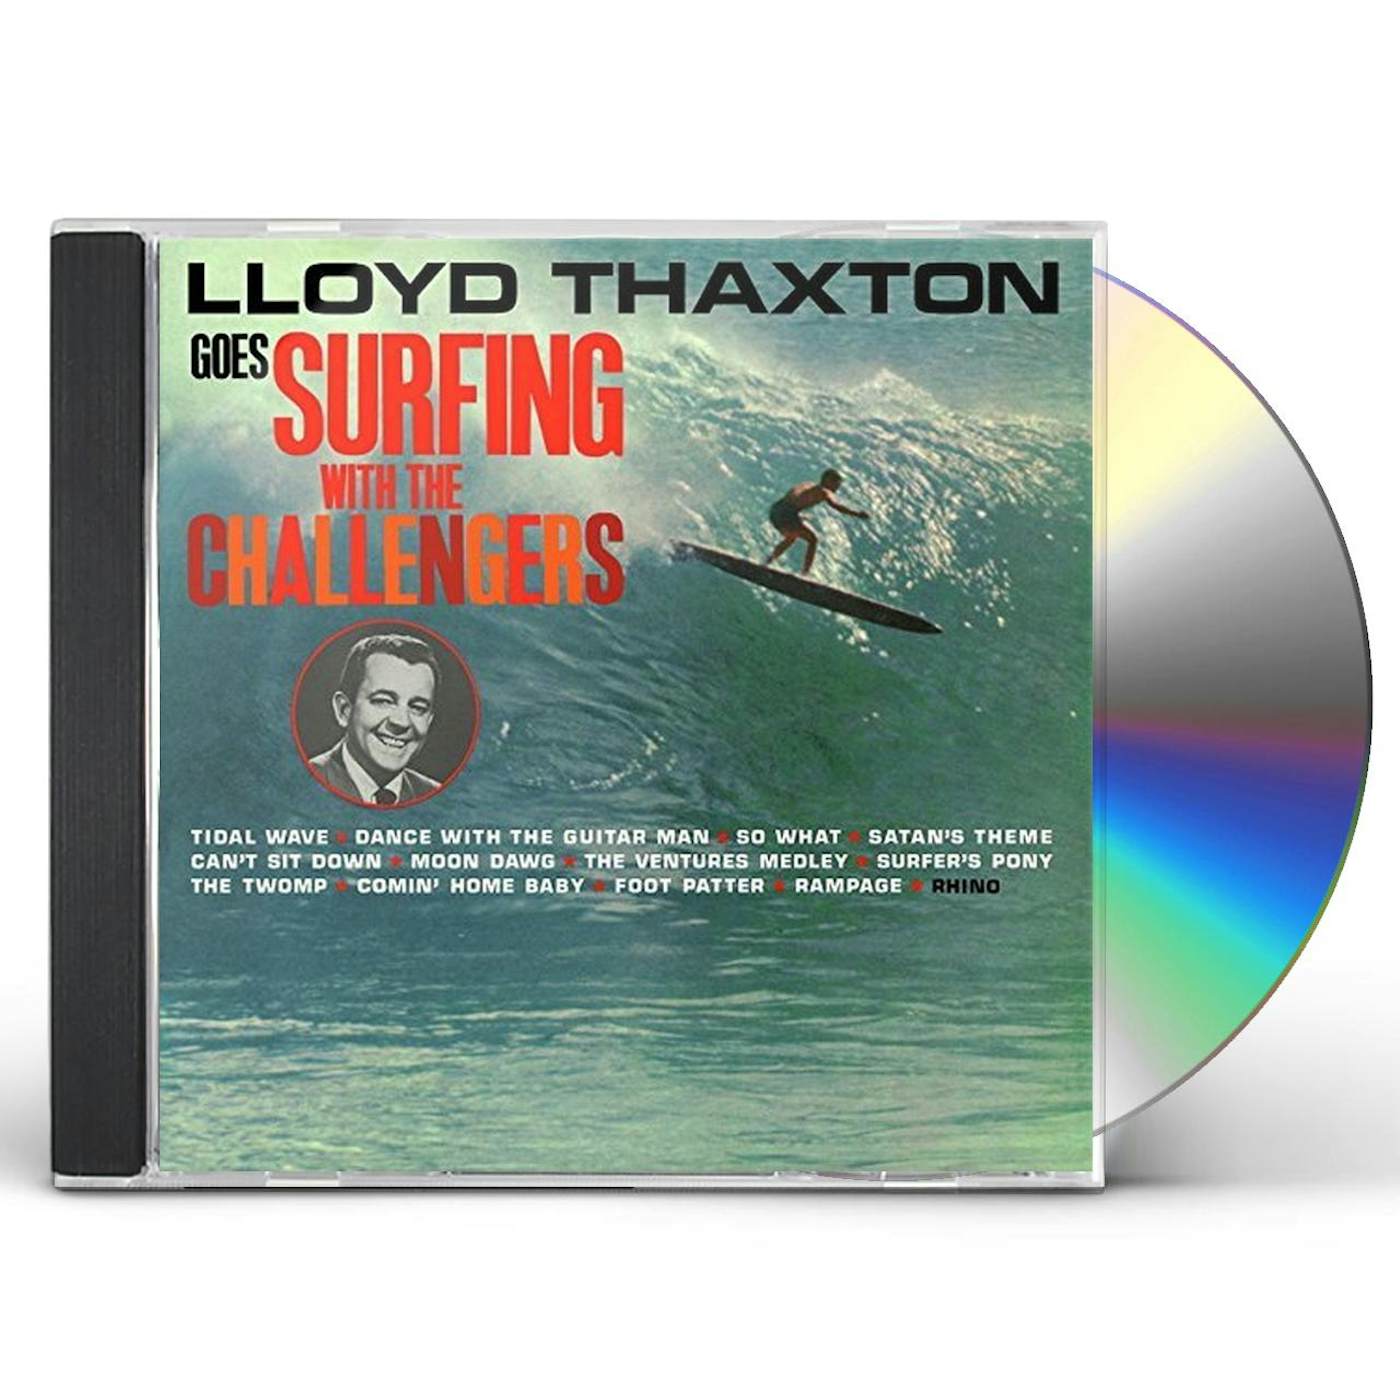 The Challengers LLOYD THAXTON GOES SURFING WITH THE CD